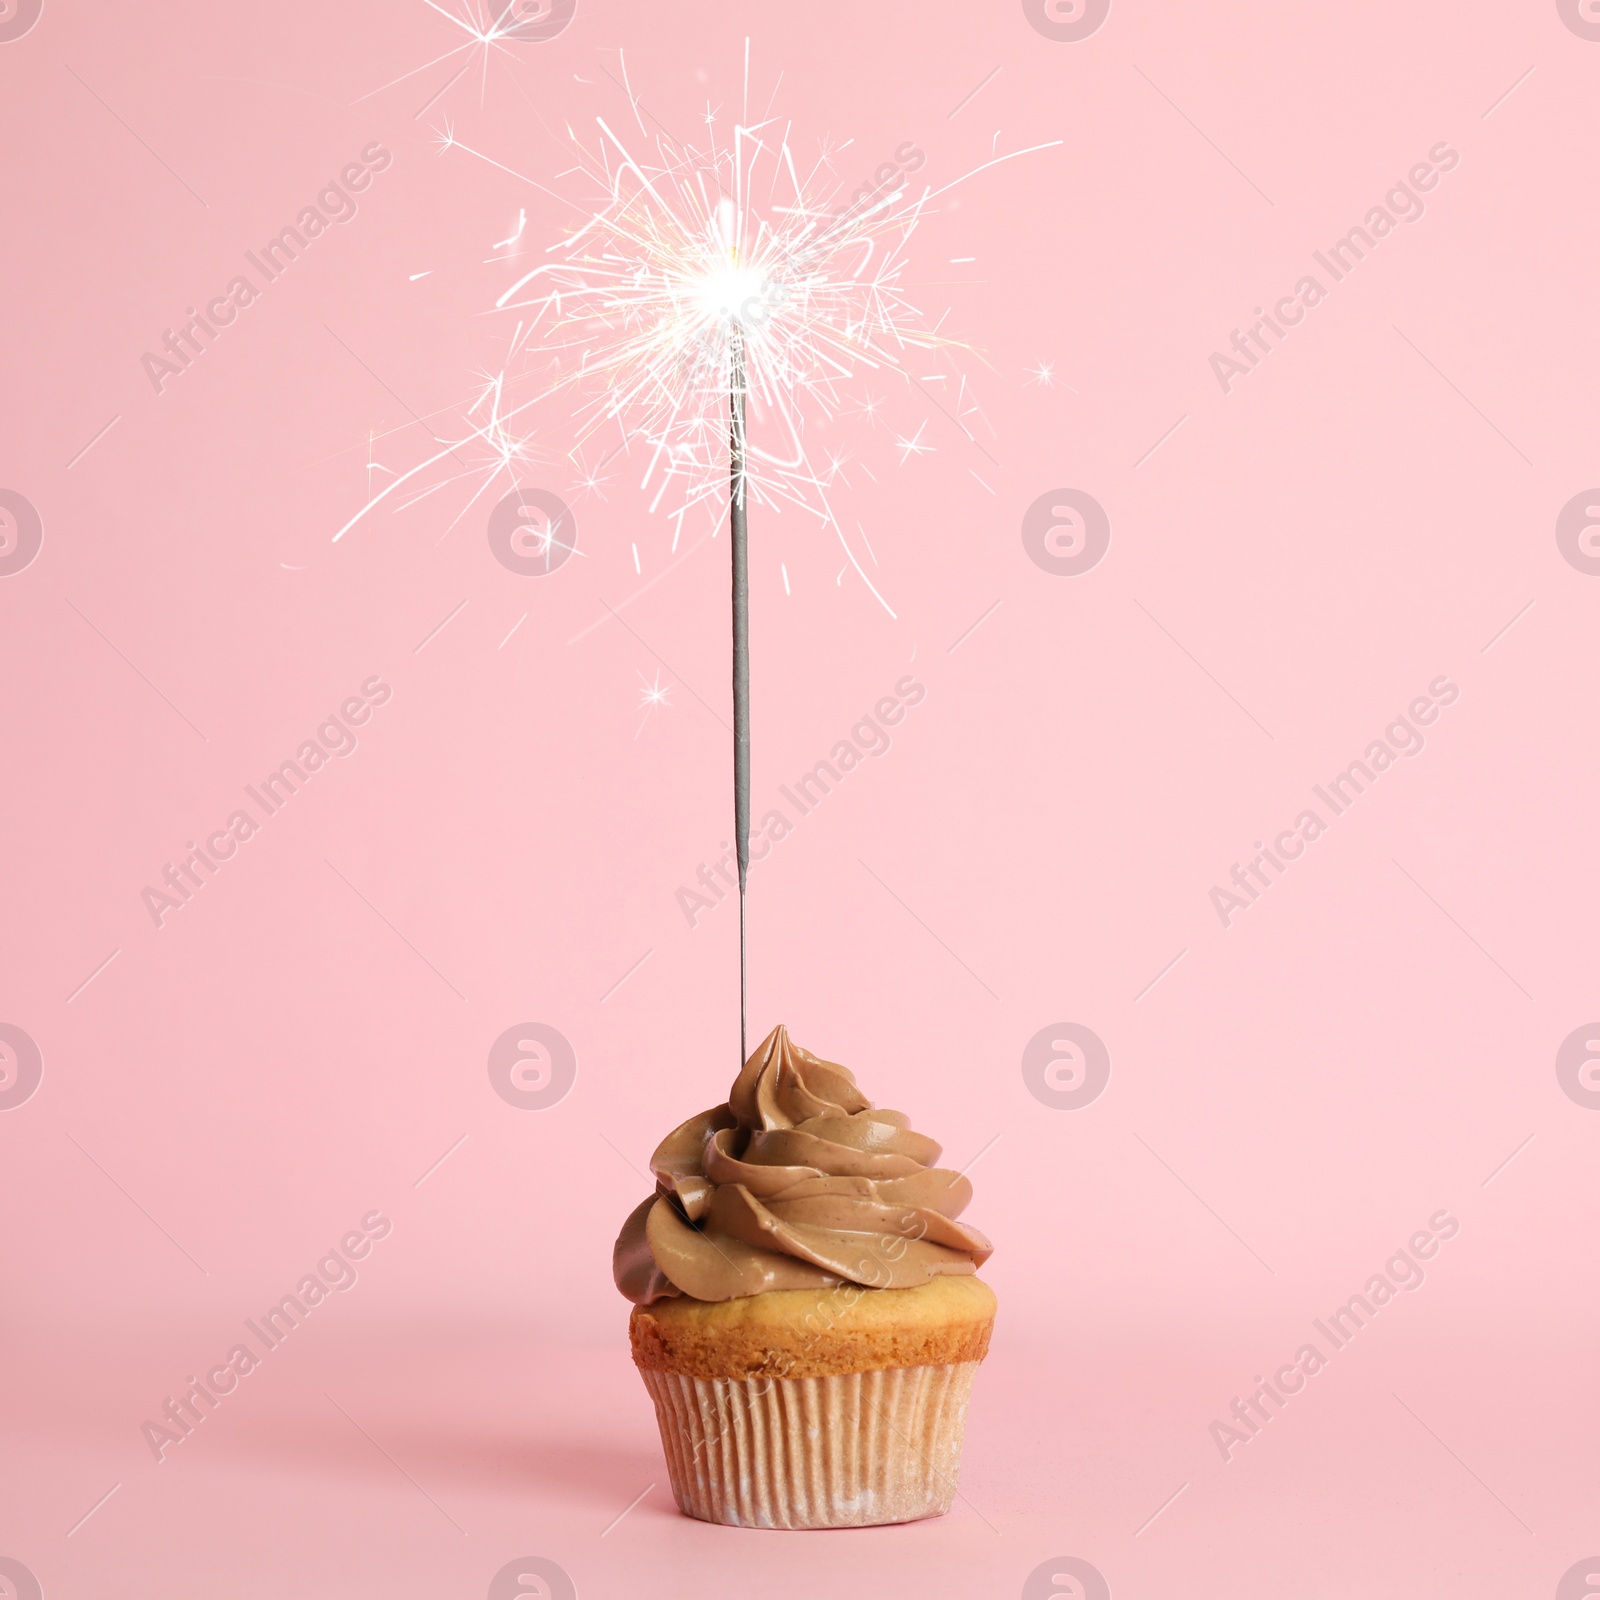 Image of Birthday cupcake with sparkler on pink background